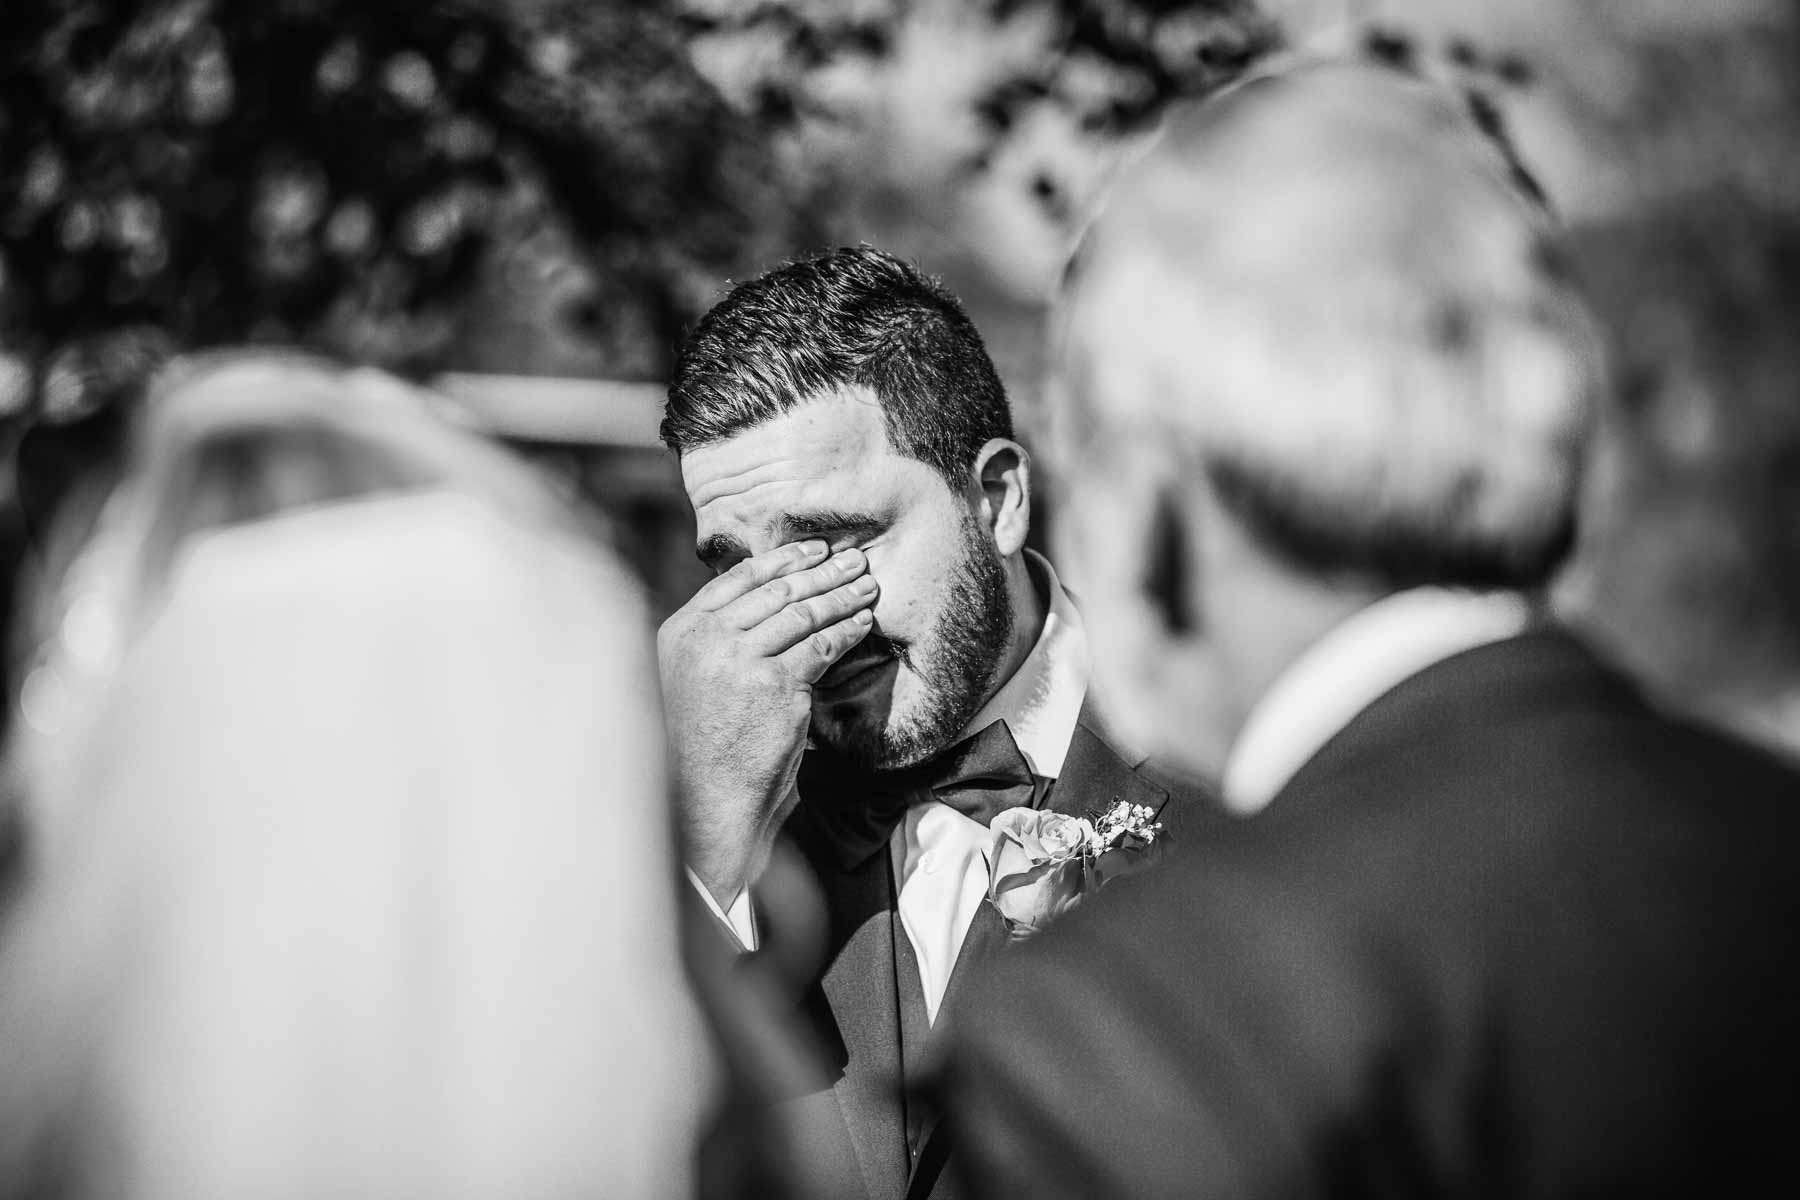 A groom gets emotional as he sees his bride coming down the aisle at Gledswood Estate wedding